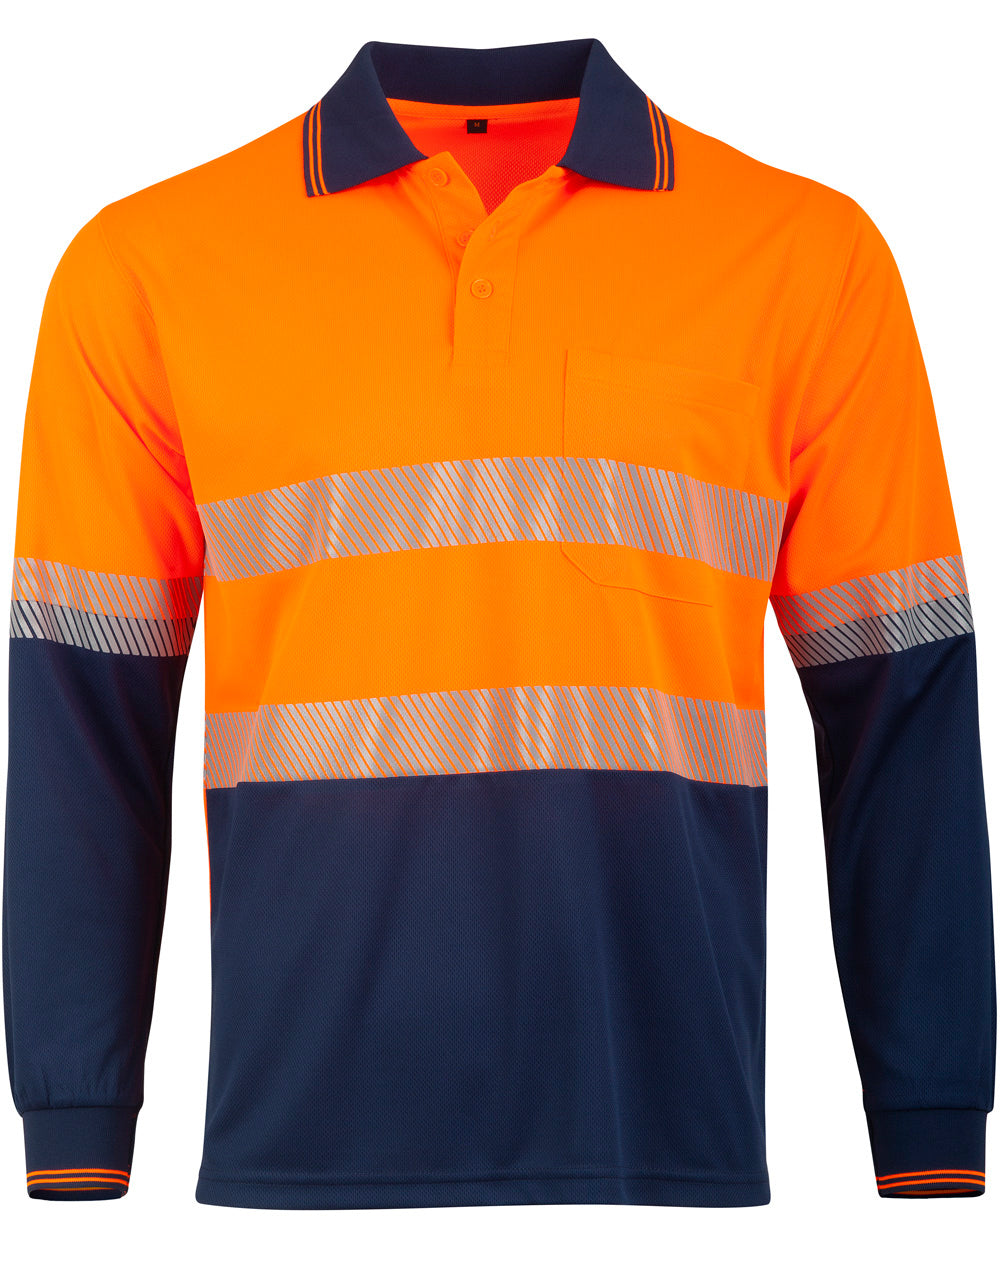 Unisex Cool Dry Segmented Tapes Hi Vis Long Sleeve Polo Shirt SW86